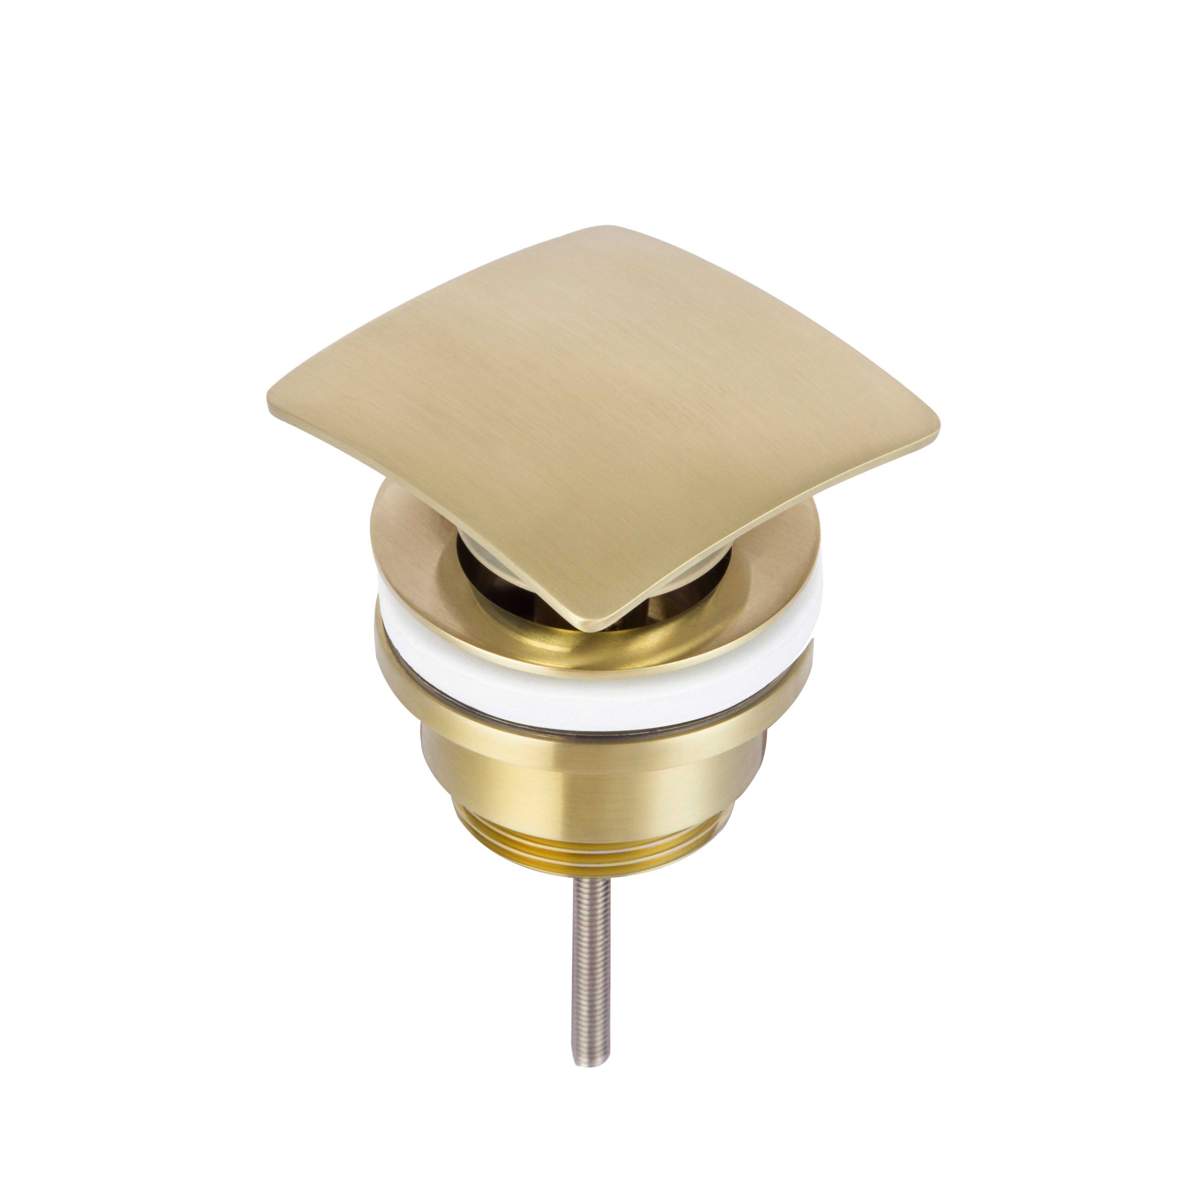 JTP Hix Brushed Brass Universal Slotted and Unslotted Basin Waste